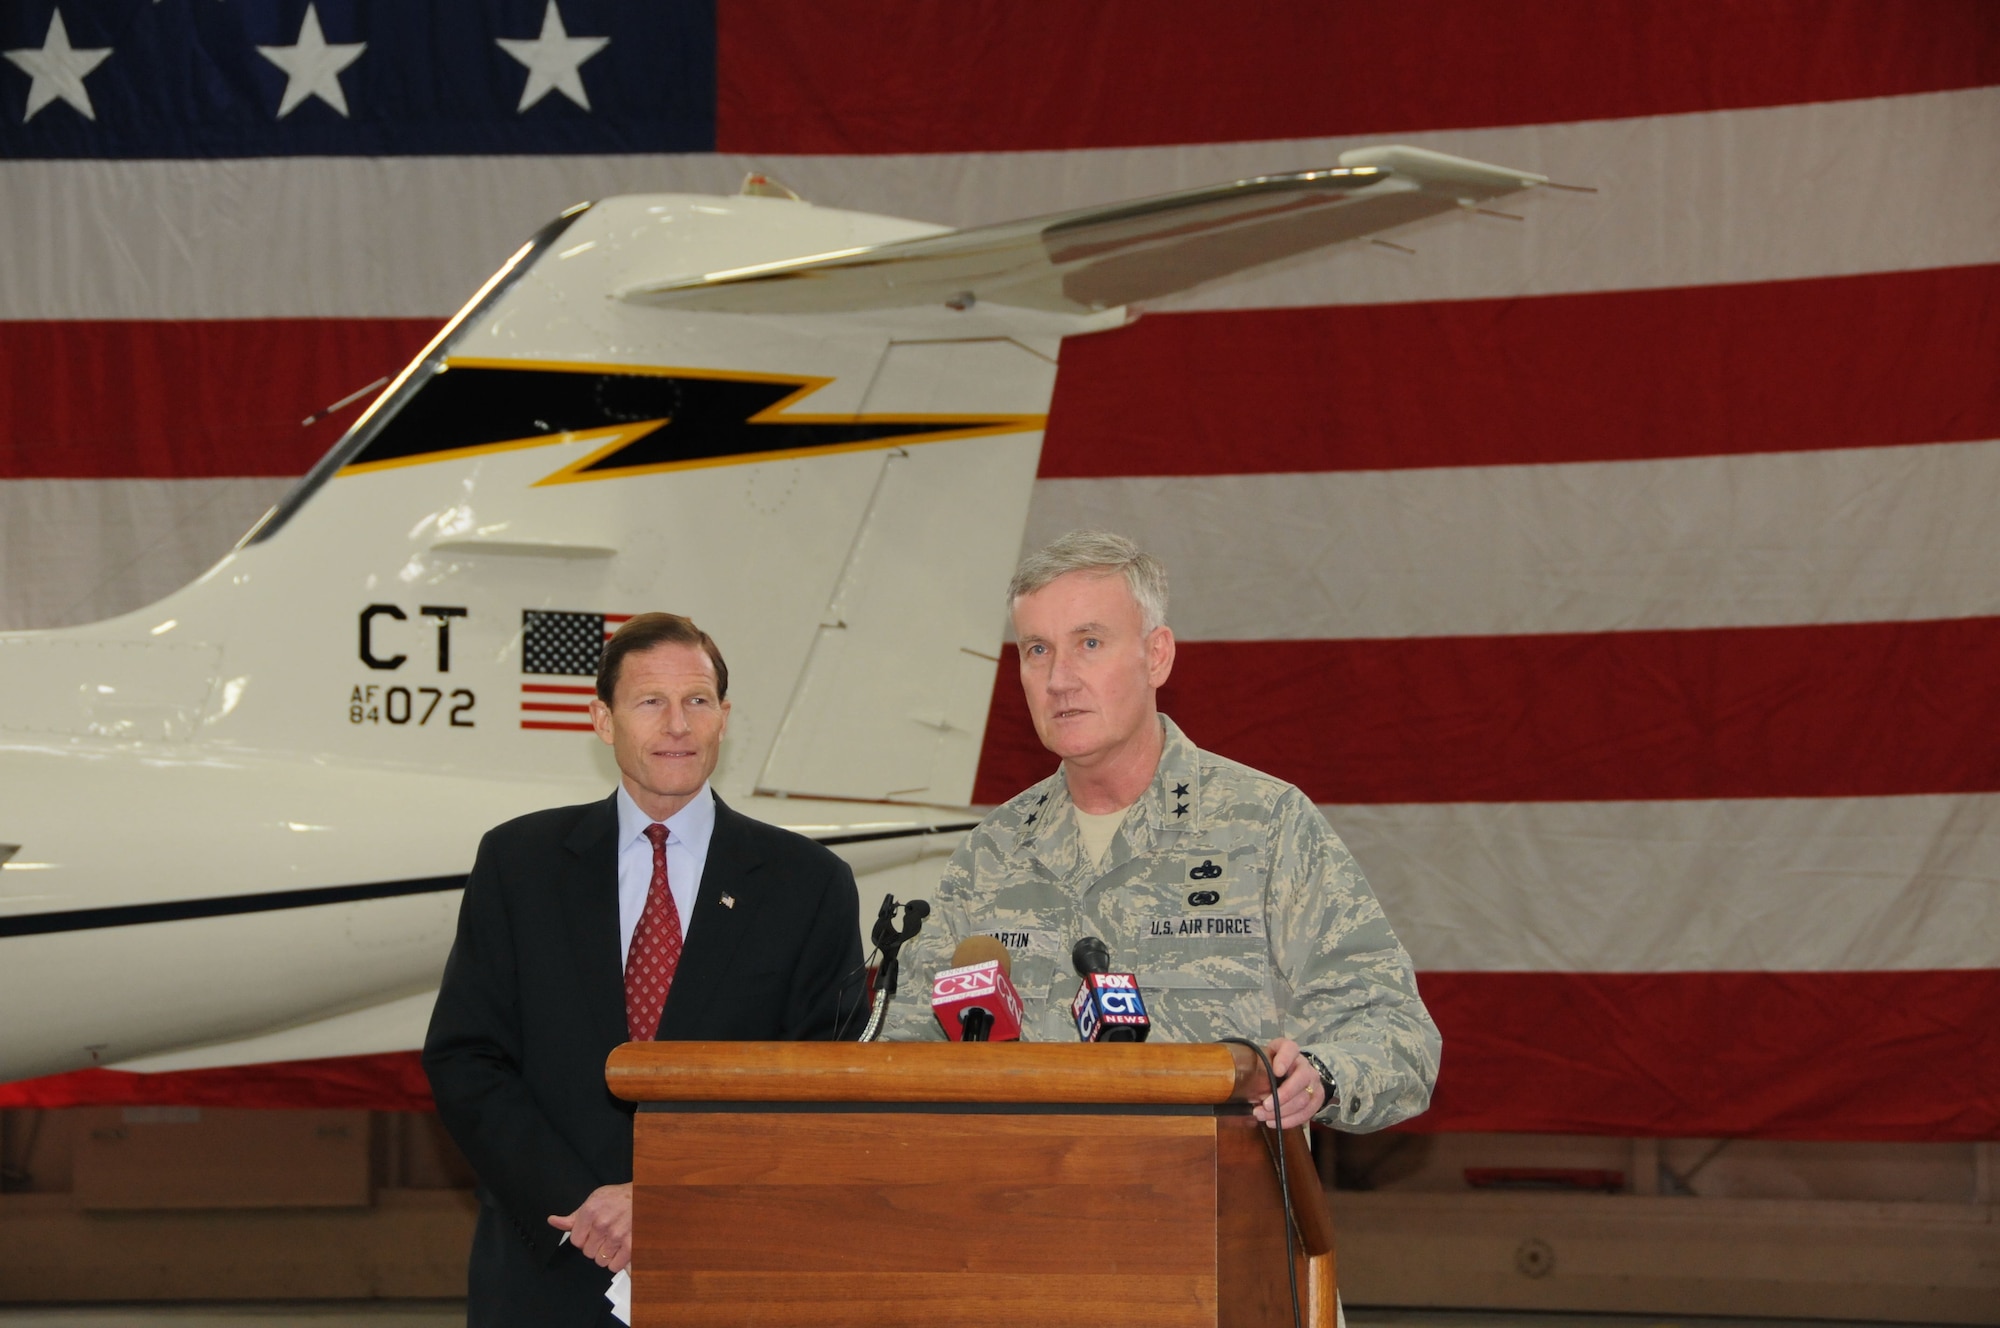 Maj. Gen. Thaddeus Martin, the adjutant general for Connecticut, introduces U.S. Senator for Connecticut Richard Blumenthal during a press conference held in the main hangar, Bradley Air National Guard Base, East Granby, Conn.February 24, 2011. (U.S. Air Force photo by  Tech. Sgt. Erin McNamara)
